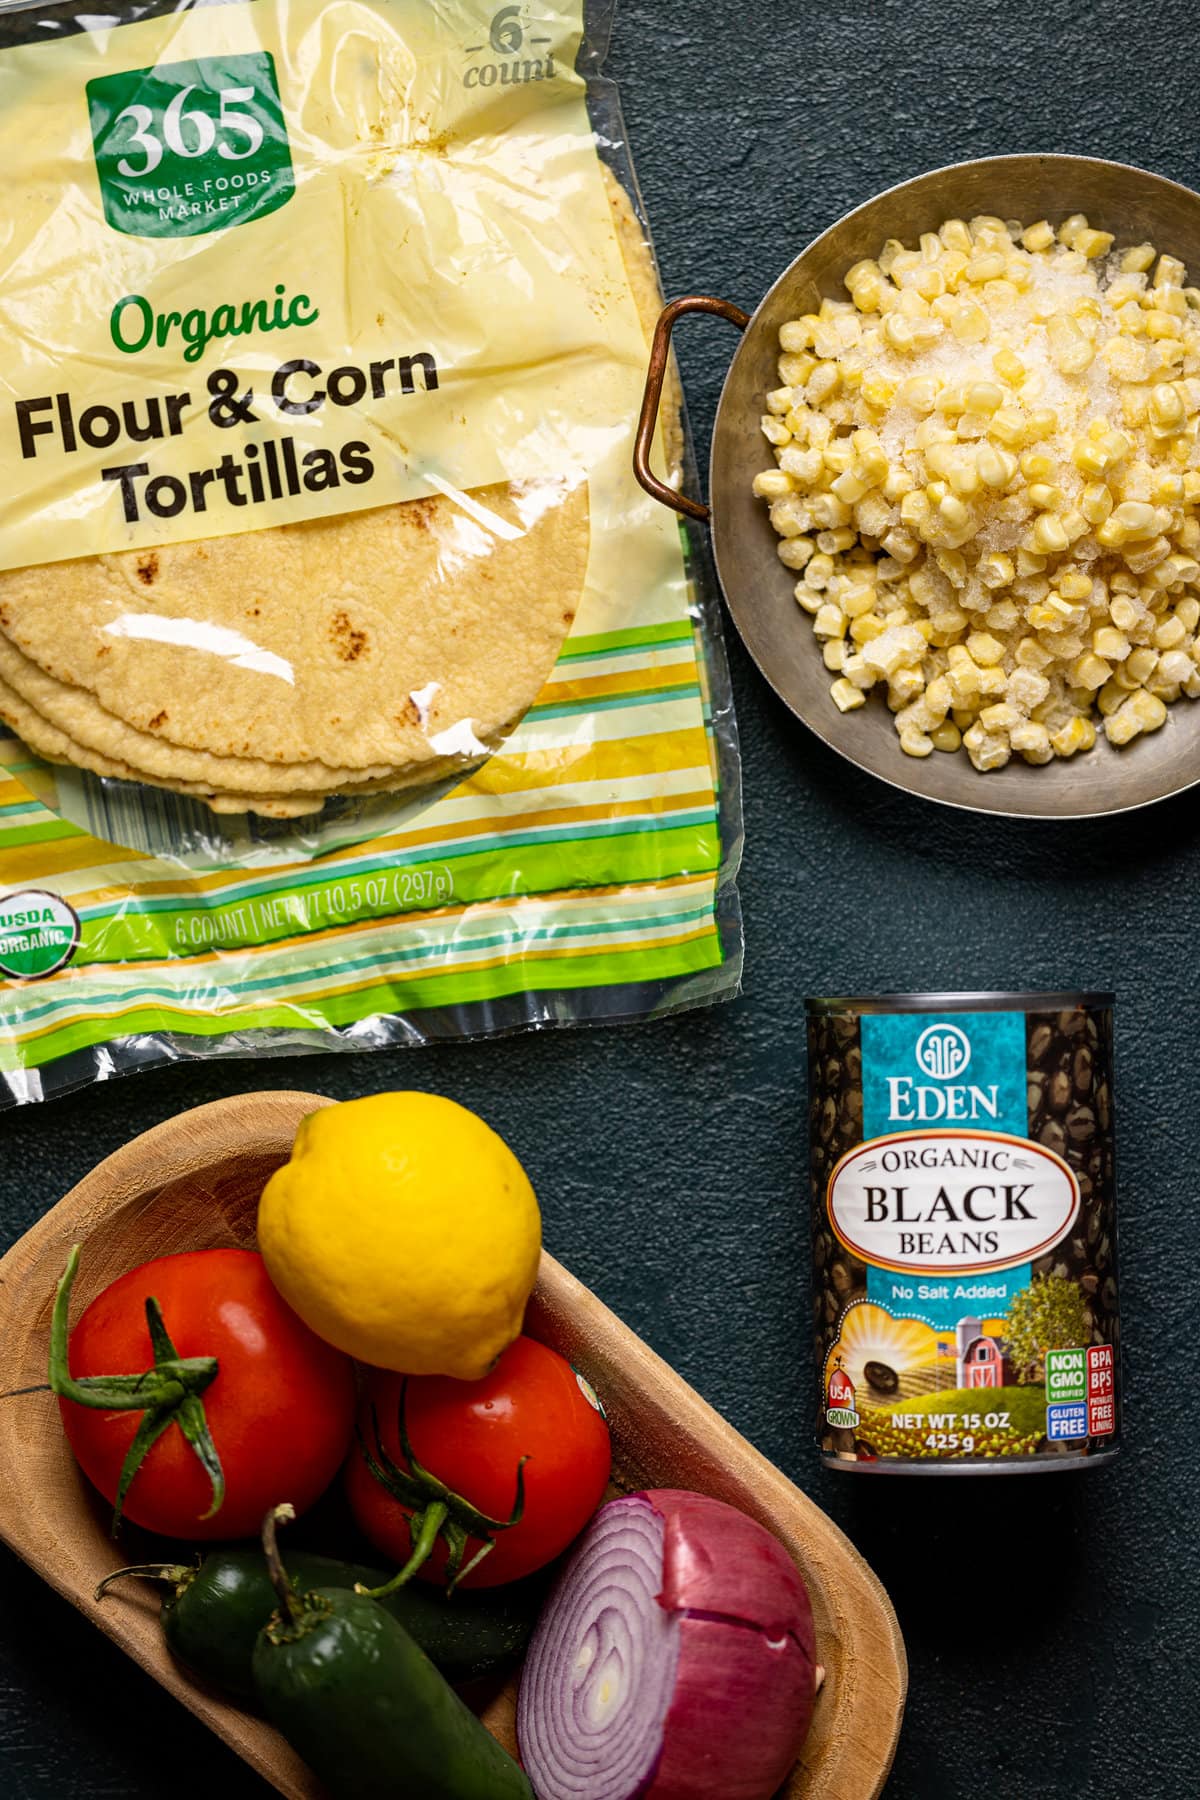 Ingredients for Baked Buffalo Chicken Tacos including tortillas, black beans, and frozen corn